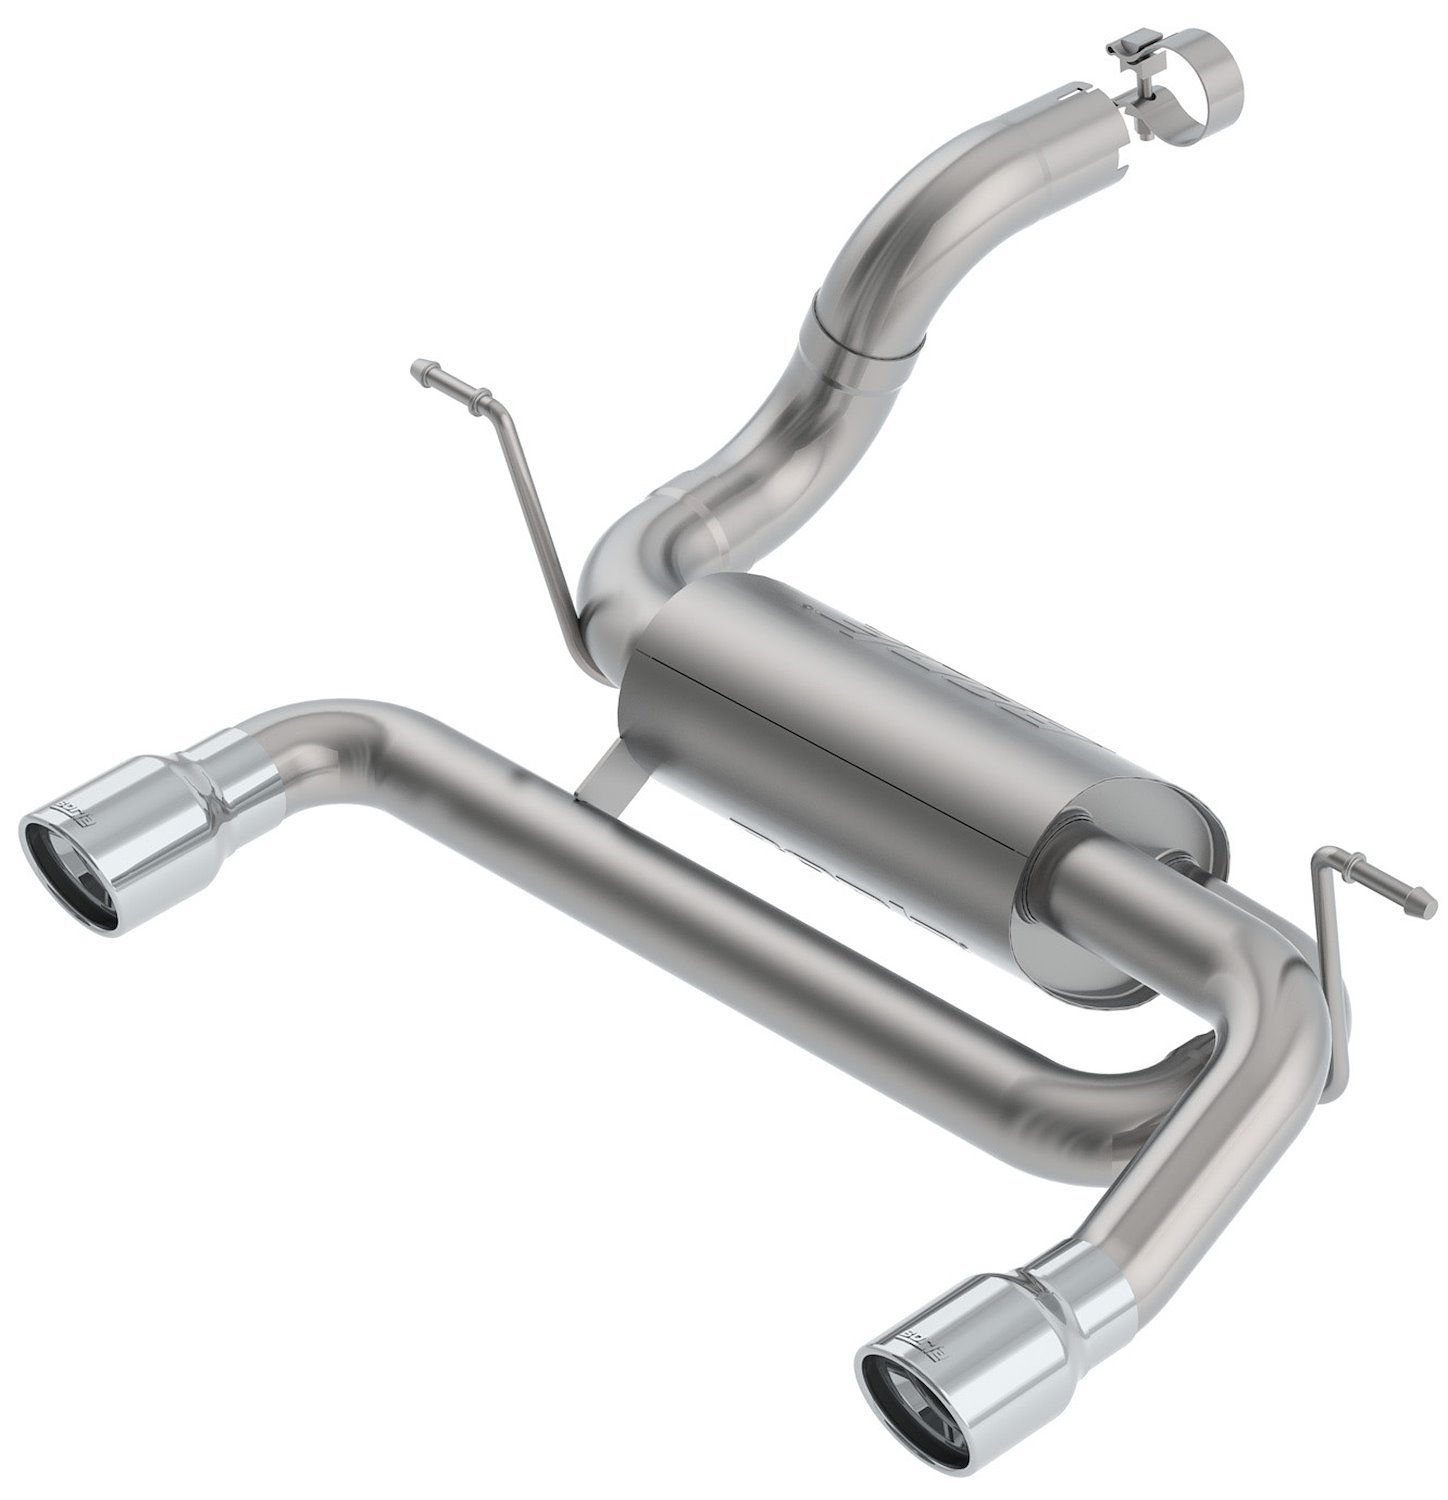 Axle-Back Exhaust System Fits 2018-2019 Jeep Wrangler JL/